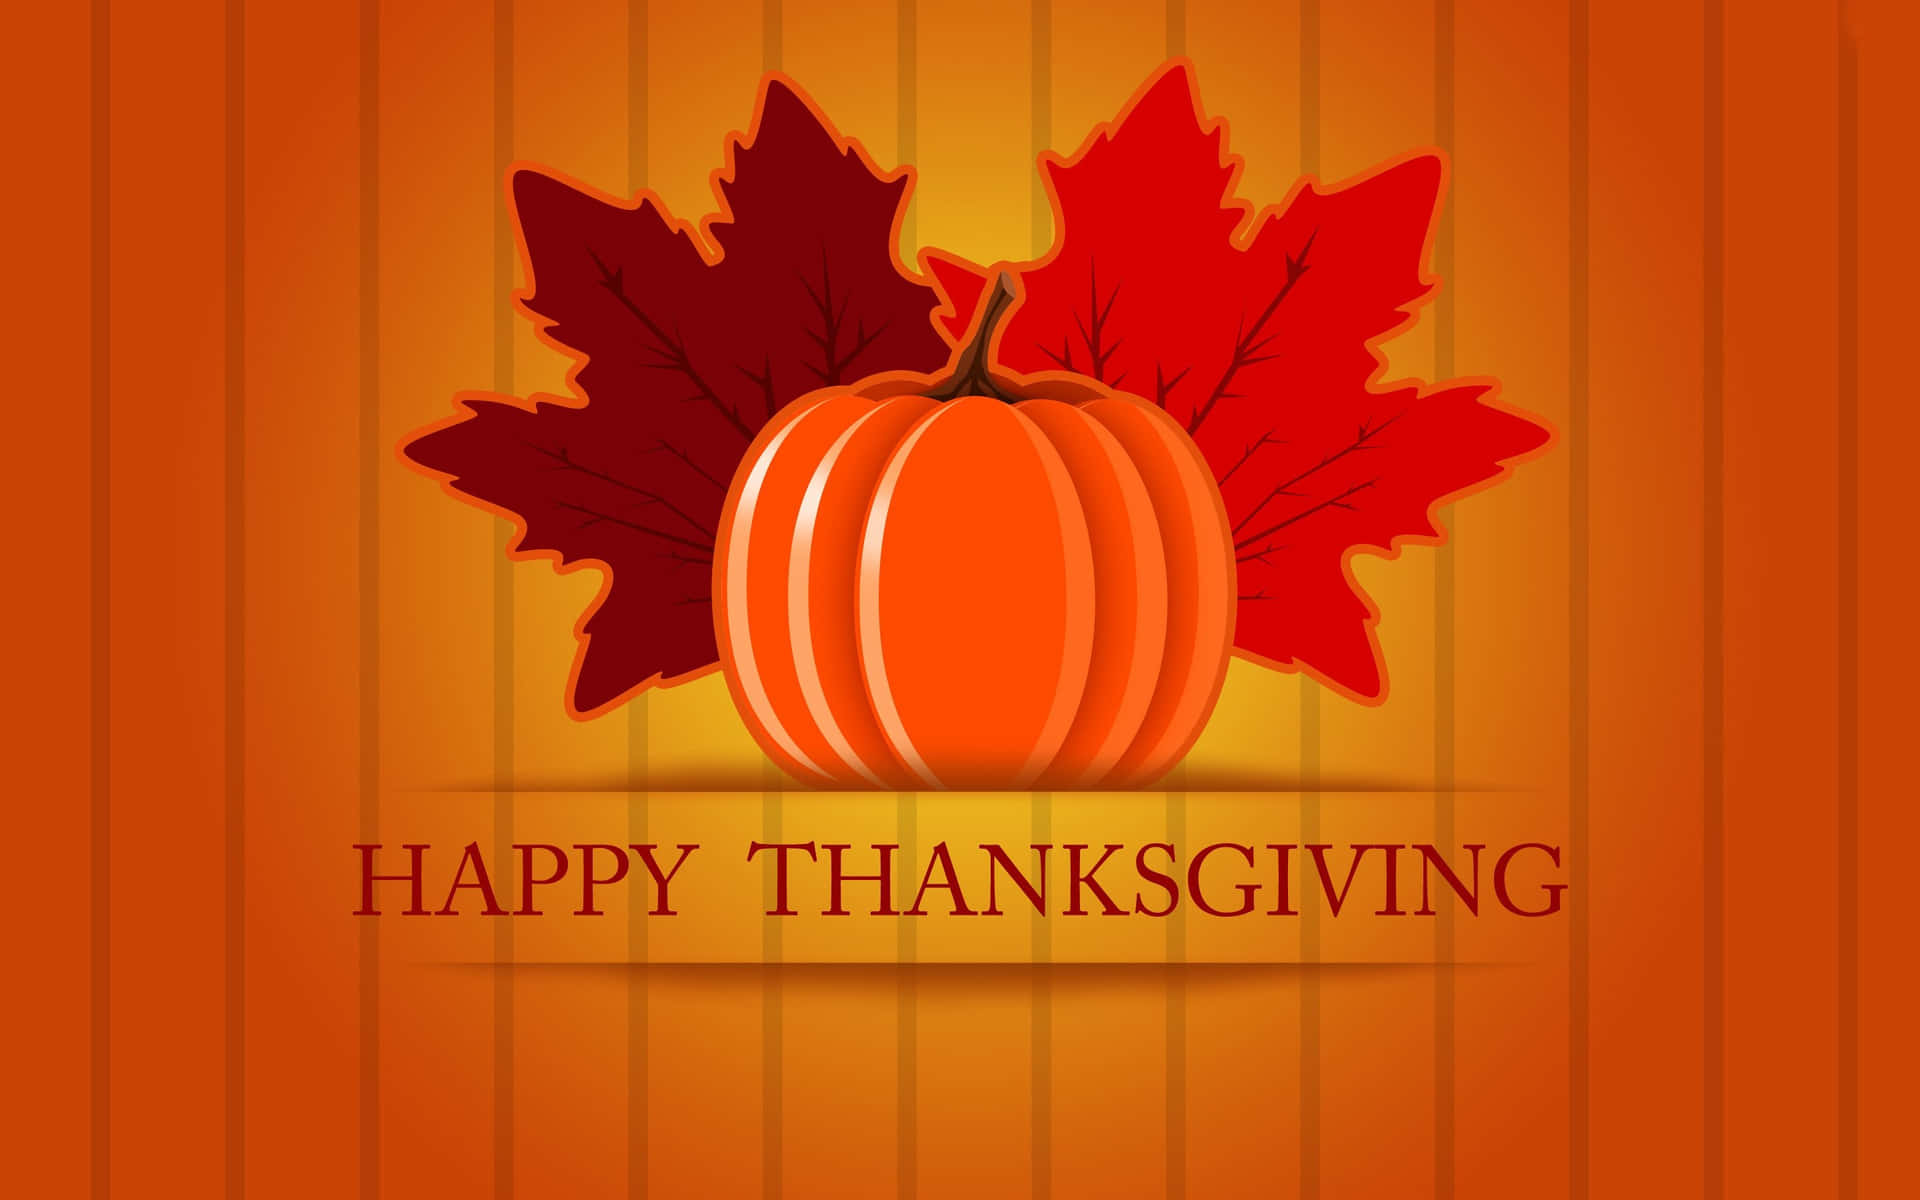 Pumpkin Against Two Maple Leaves Happy Thanksgiving Greeting Wallpaper